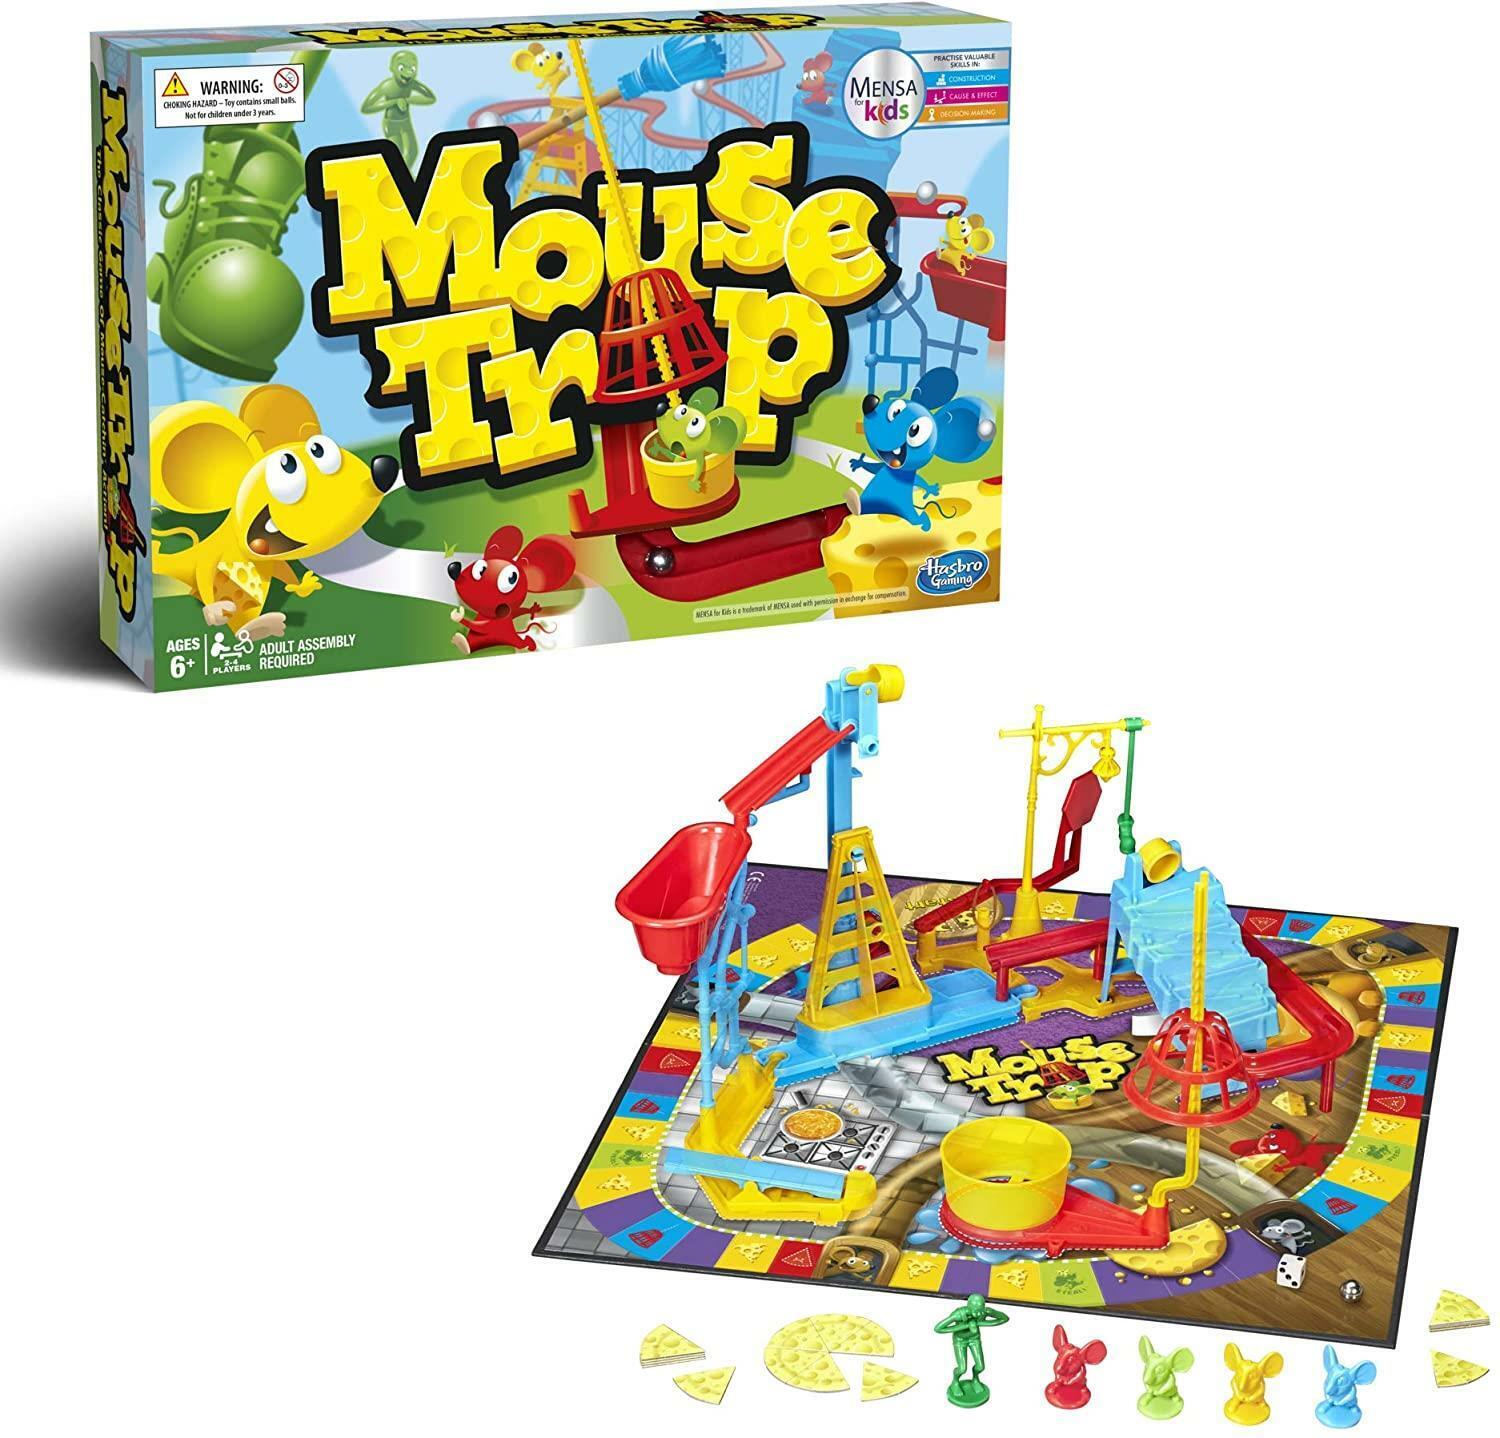 Mouse Trap Game Facts